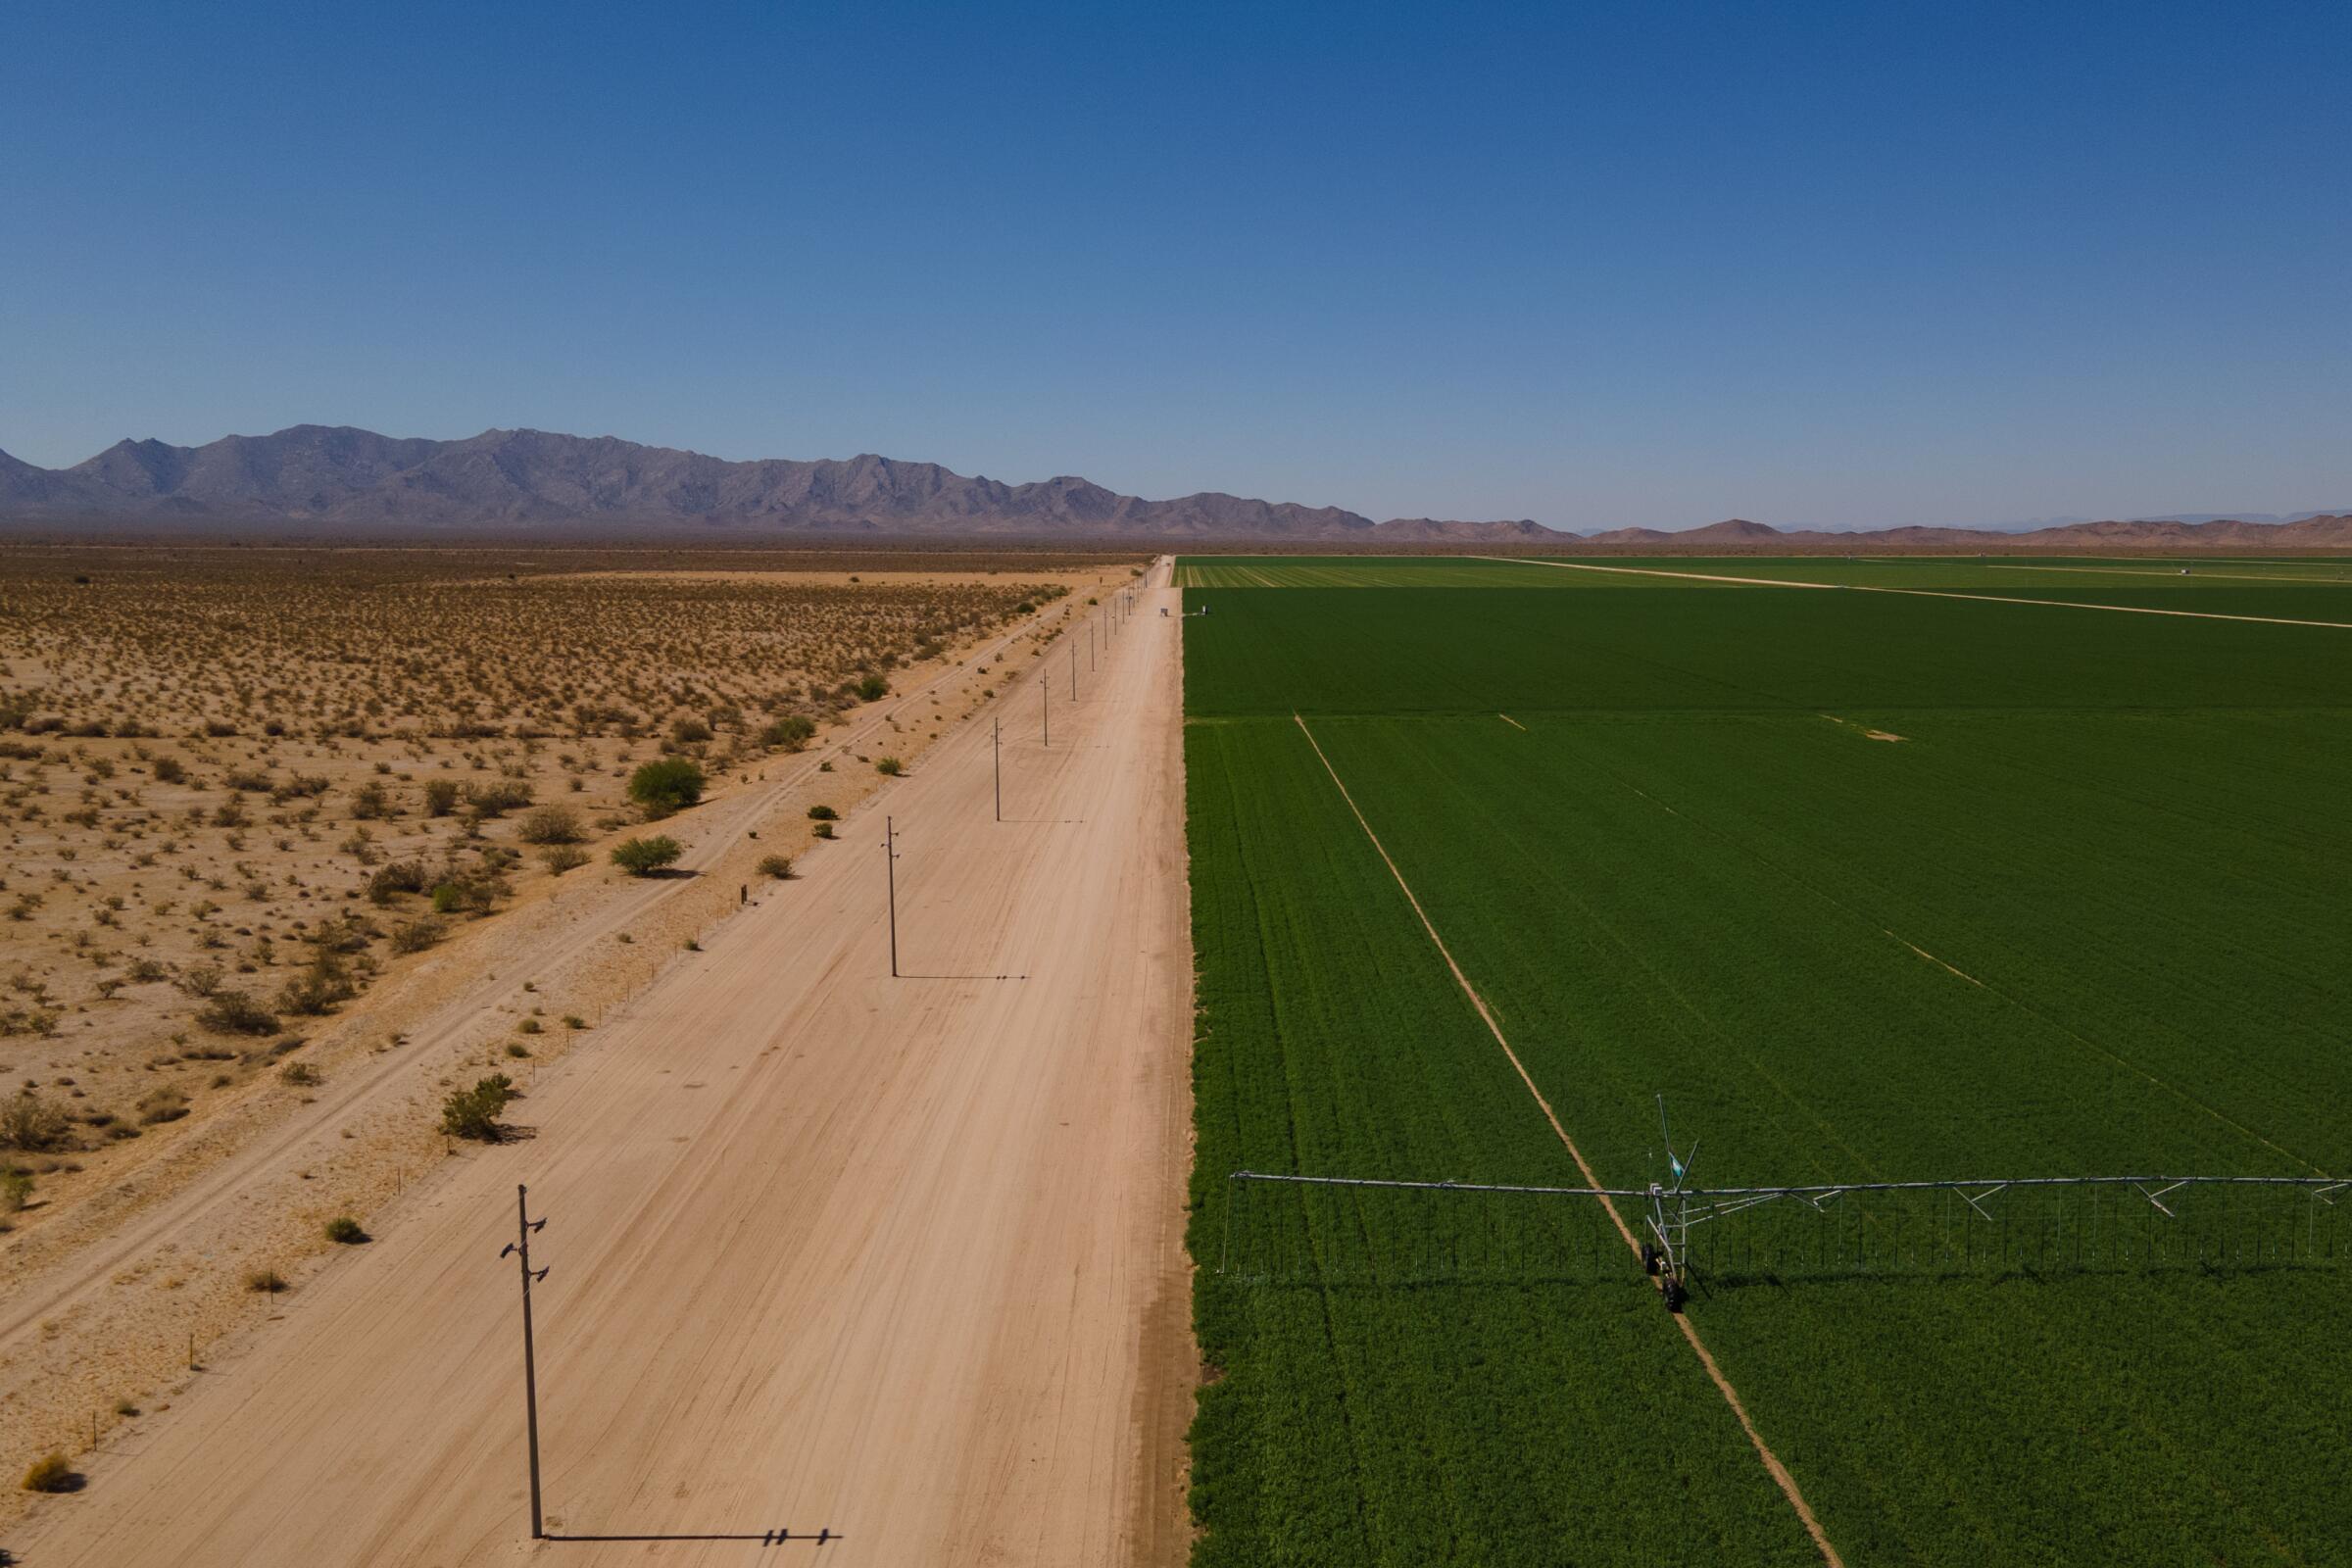 An irrigation system waters an alfalfa field at the Fondomonte farm in Butler Valley, Arizona. 